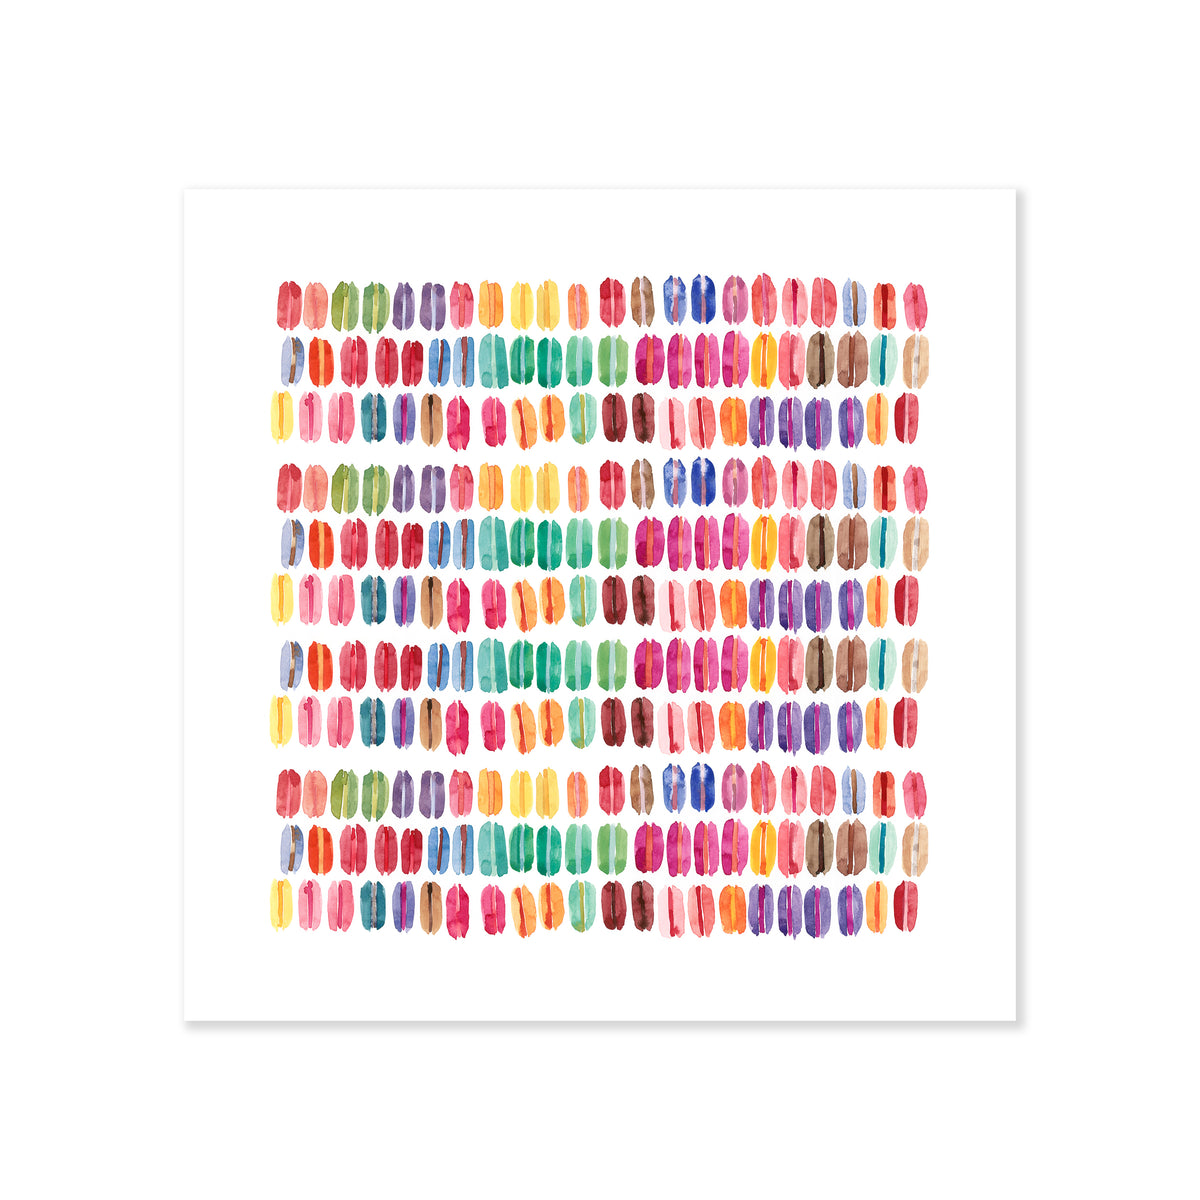 A fine art print illustrating an assortment of colorful macarons arranged in eleven rows of 22 including pinks greens yellows oranges purples and browns painted with watercolor on a soft white background